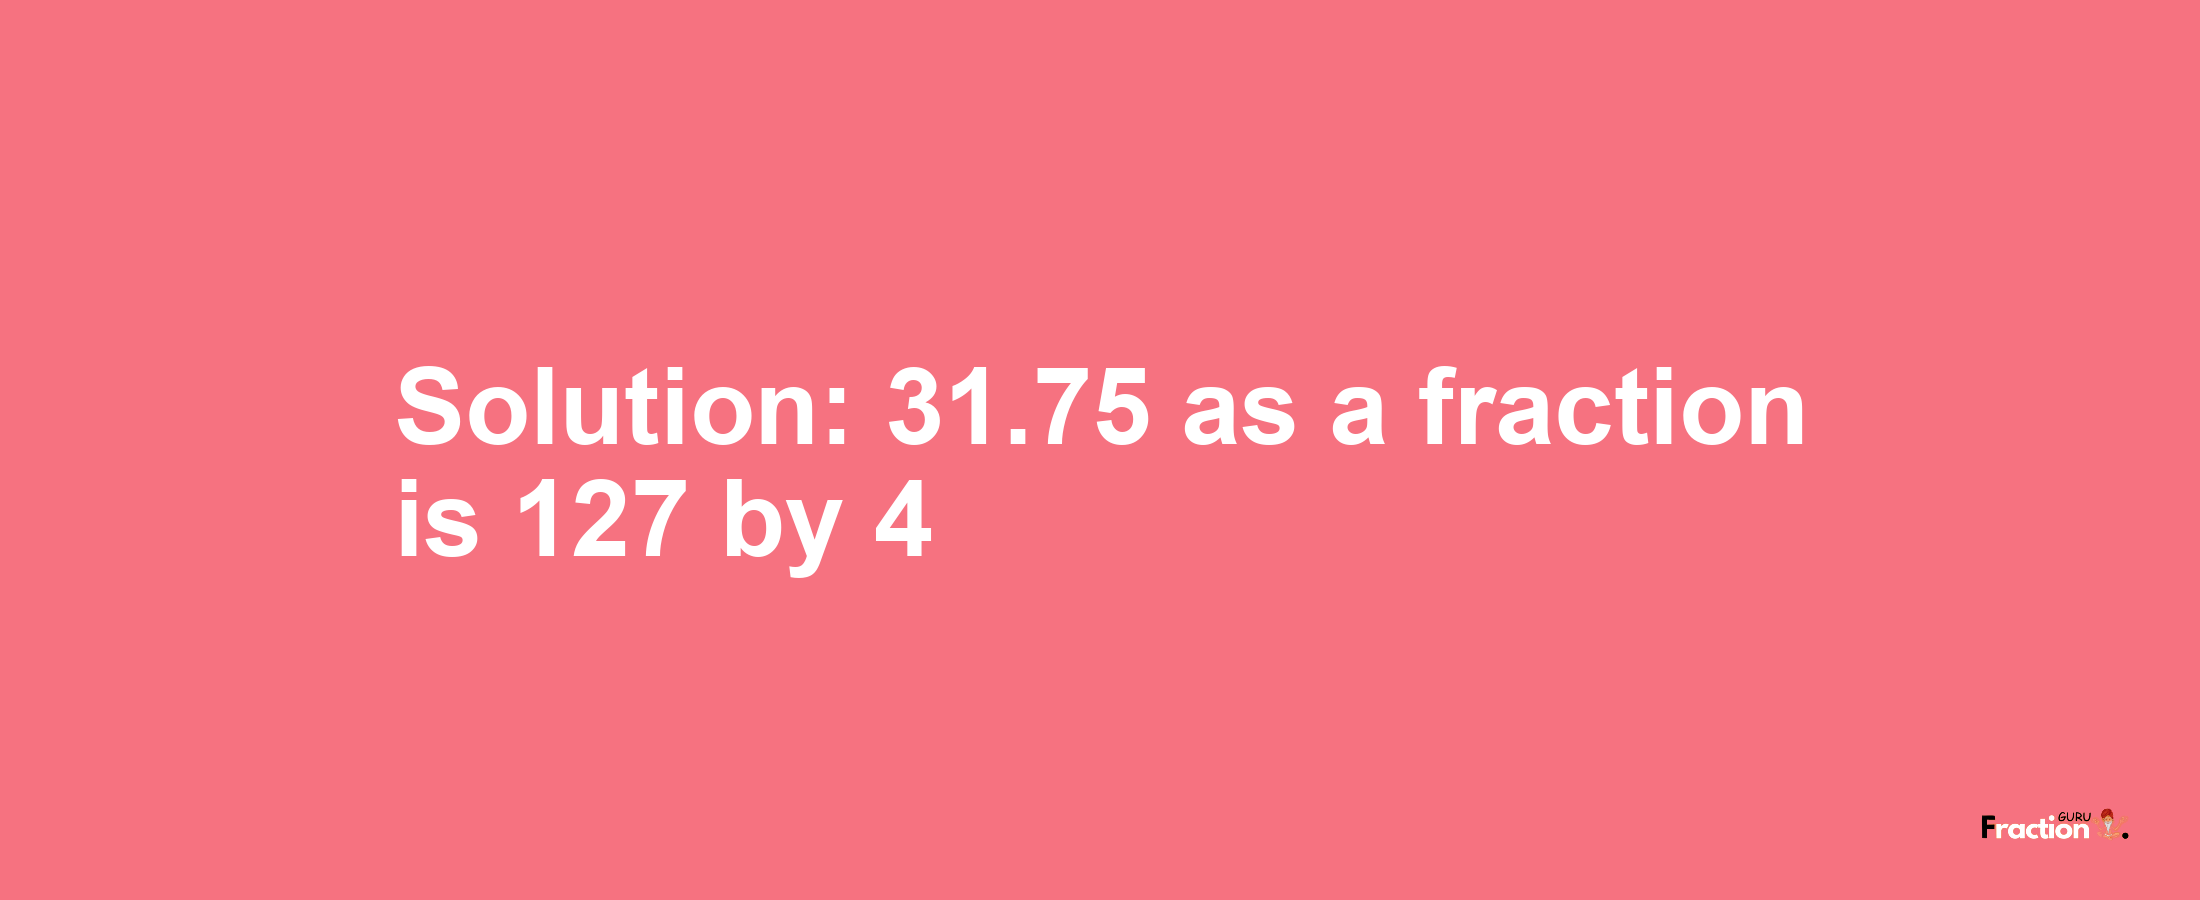 Solution:31.75 as a fraction is 127/4